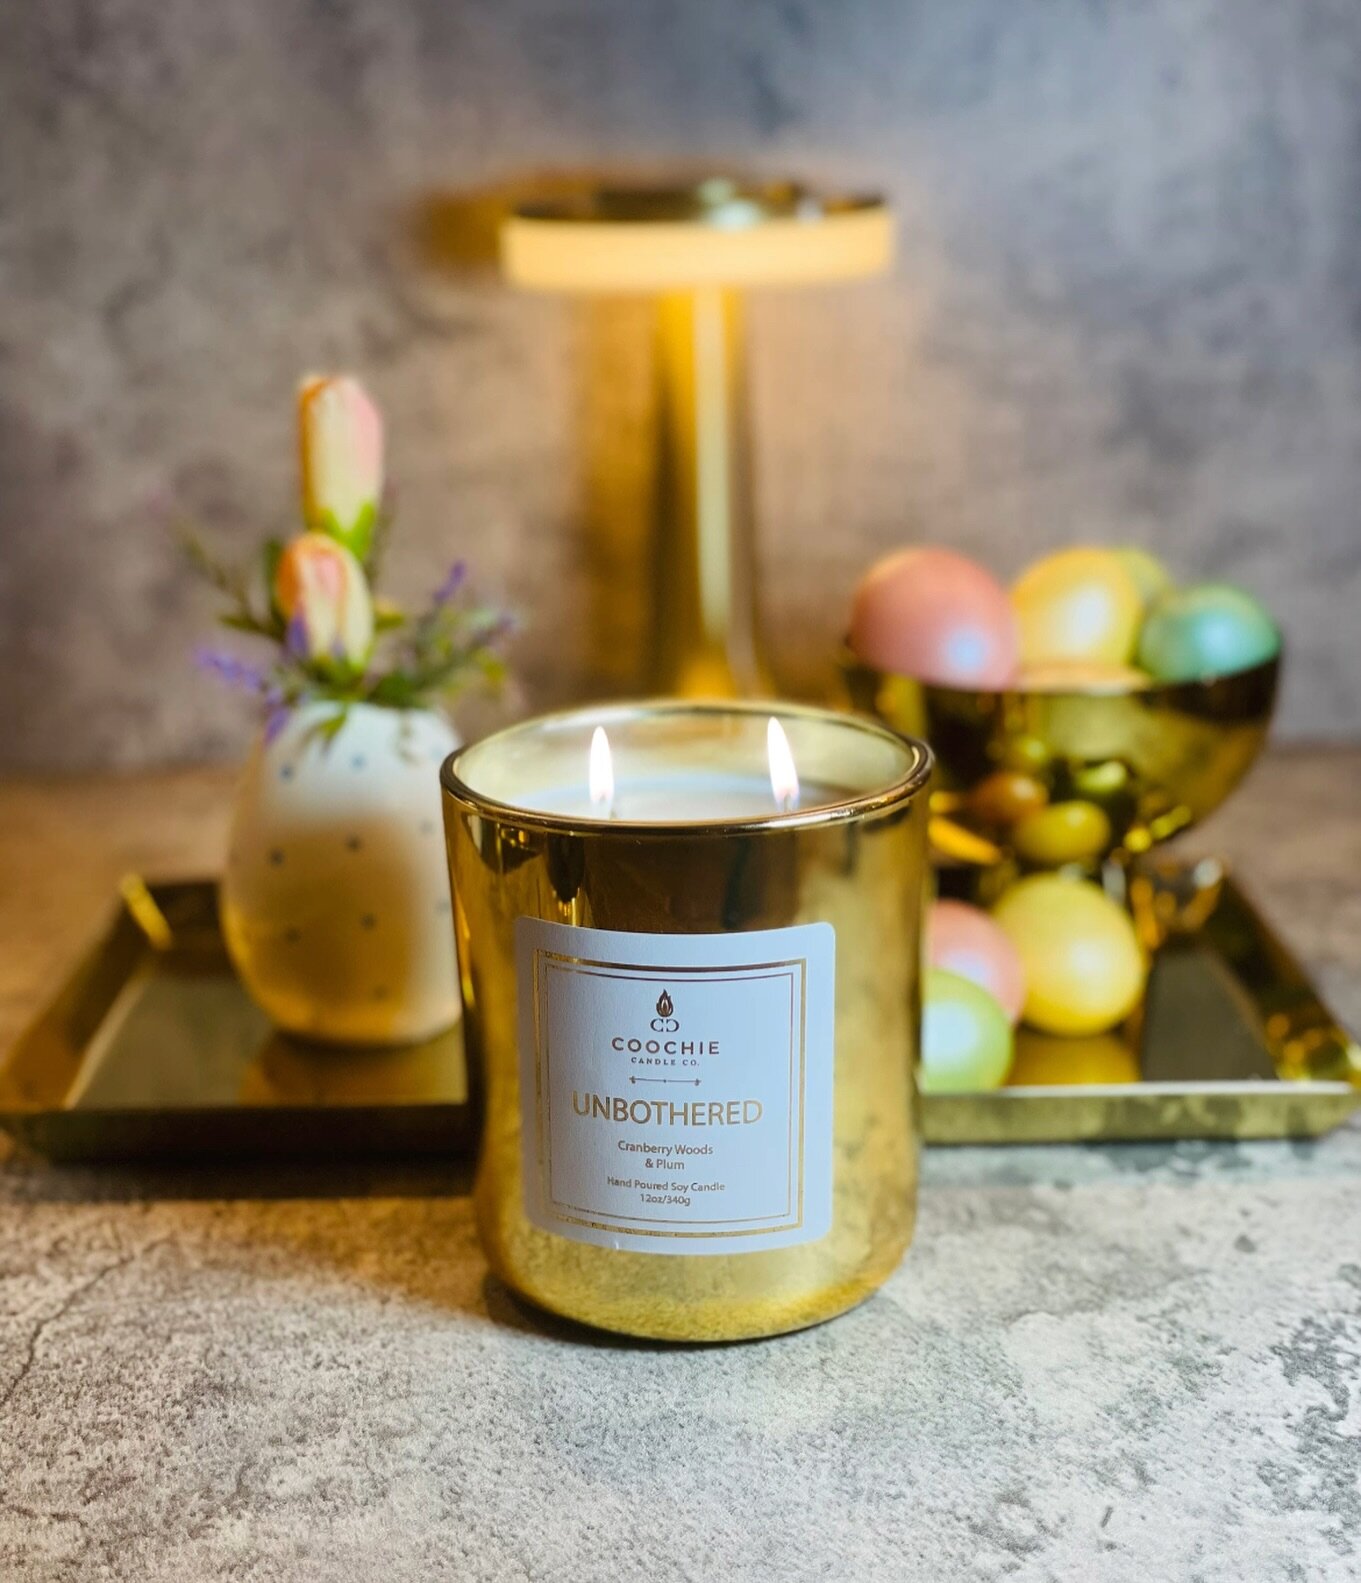 On this joyous day, may your heart be filled with love, your spirit be renewed with hope, and your life be blessed with peace. Let&rsquo;s celebrate the promise of new beginnings.

#Confidence #Empowerment SelfCare #bold #soycandles #luxury #homedeco